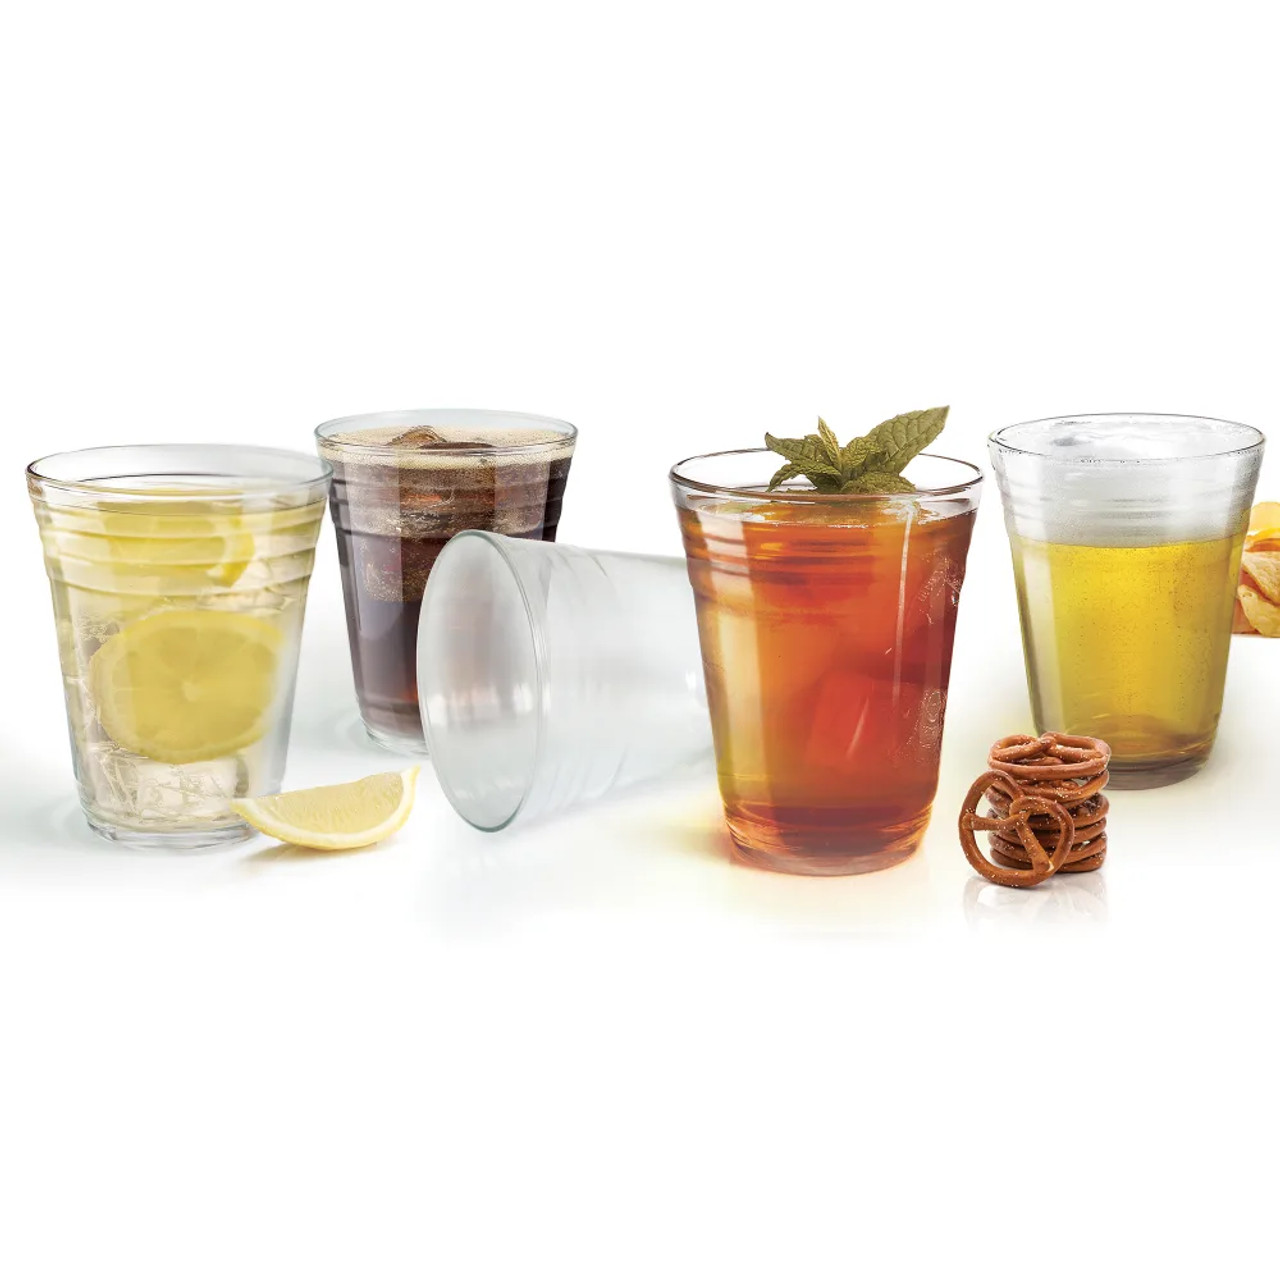 Arcoroc J8821 16 oz Party Mixing Glass - Clear Glass, Dishwasher Safe (24/Case) - Chicken Pieces